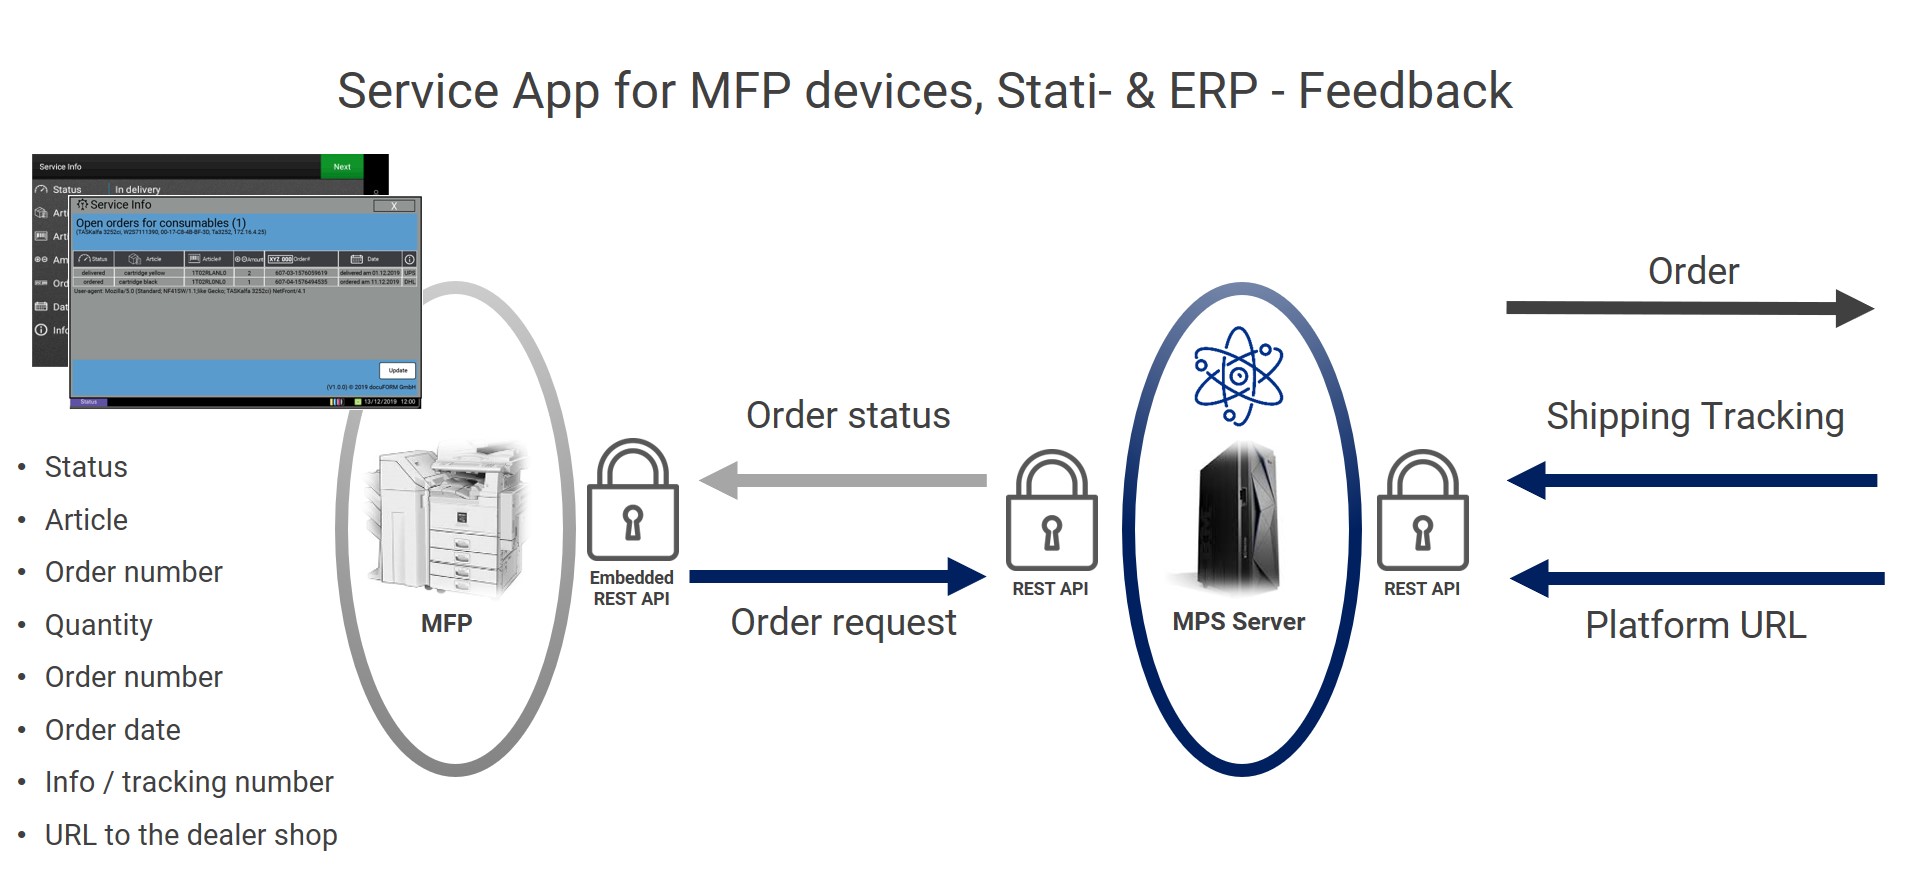 Function of the Service App for Multi Function Devices